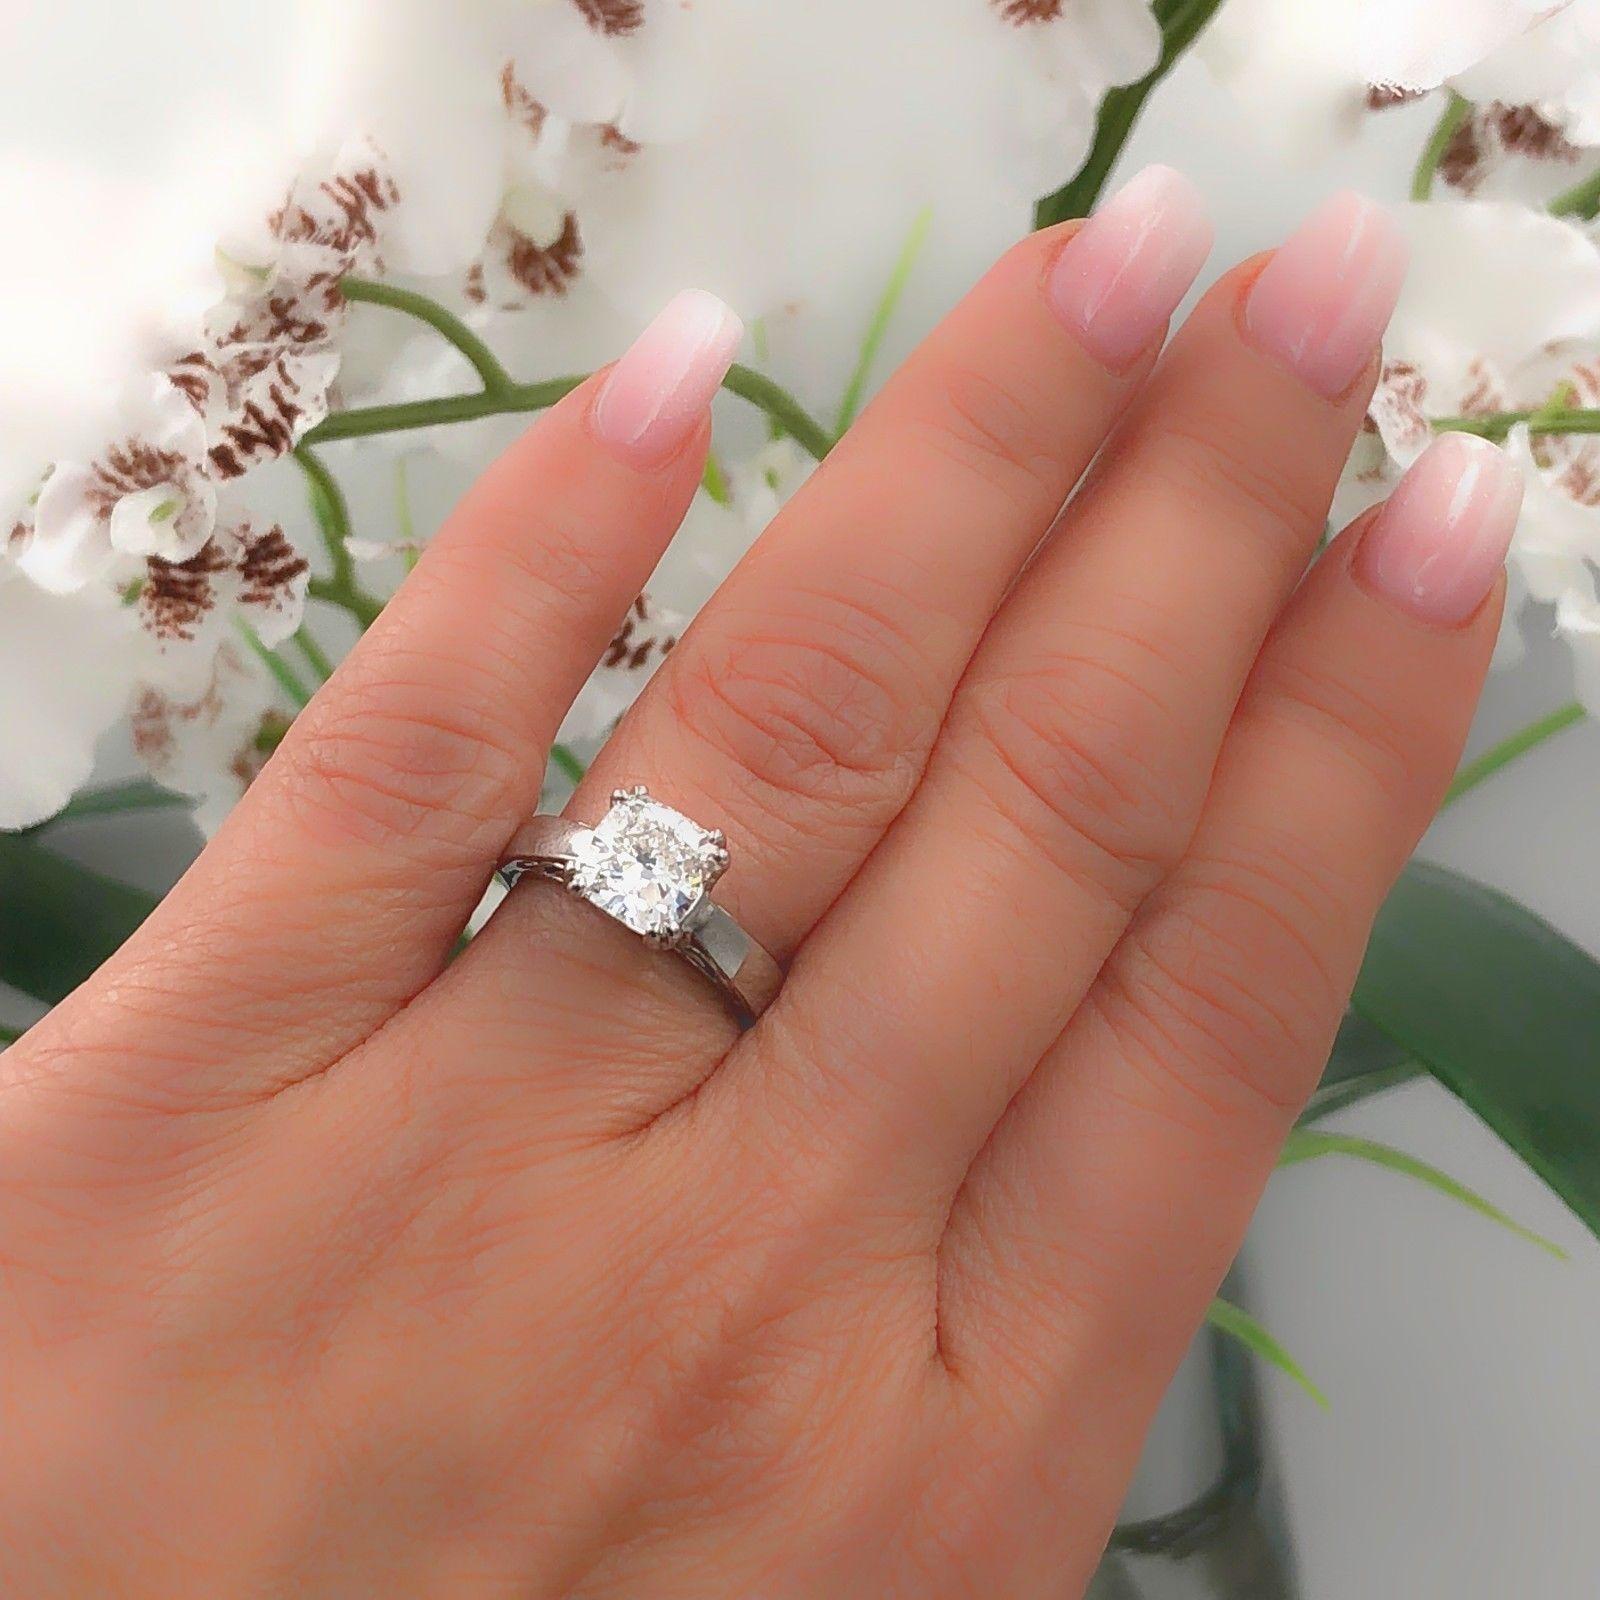 Na Hoku 
Cushion Cut Diamond Solitaire Engagement Ring in 18kt White Gold.  
Cushion Diamond is 1.97 CTS F color, VVS1 clarity.... diamond is inscribed NA HOKU IGI GT12278112.  
Ring is Hallmarked NA HOKU 18K 1.97.  
Size 5 - sizable.  
Includes IGI